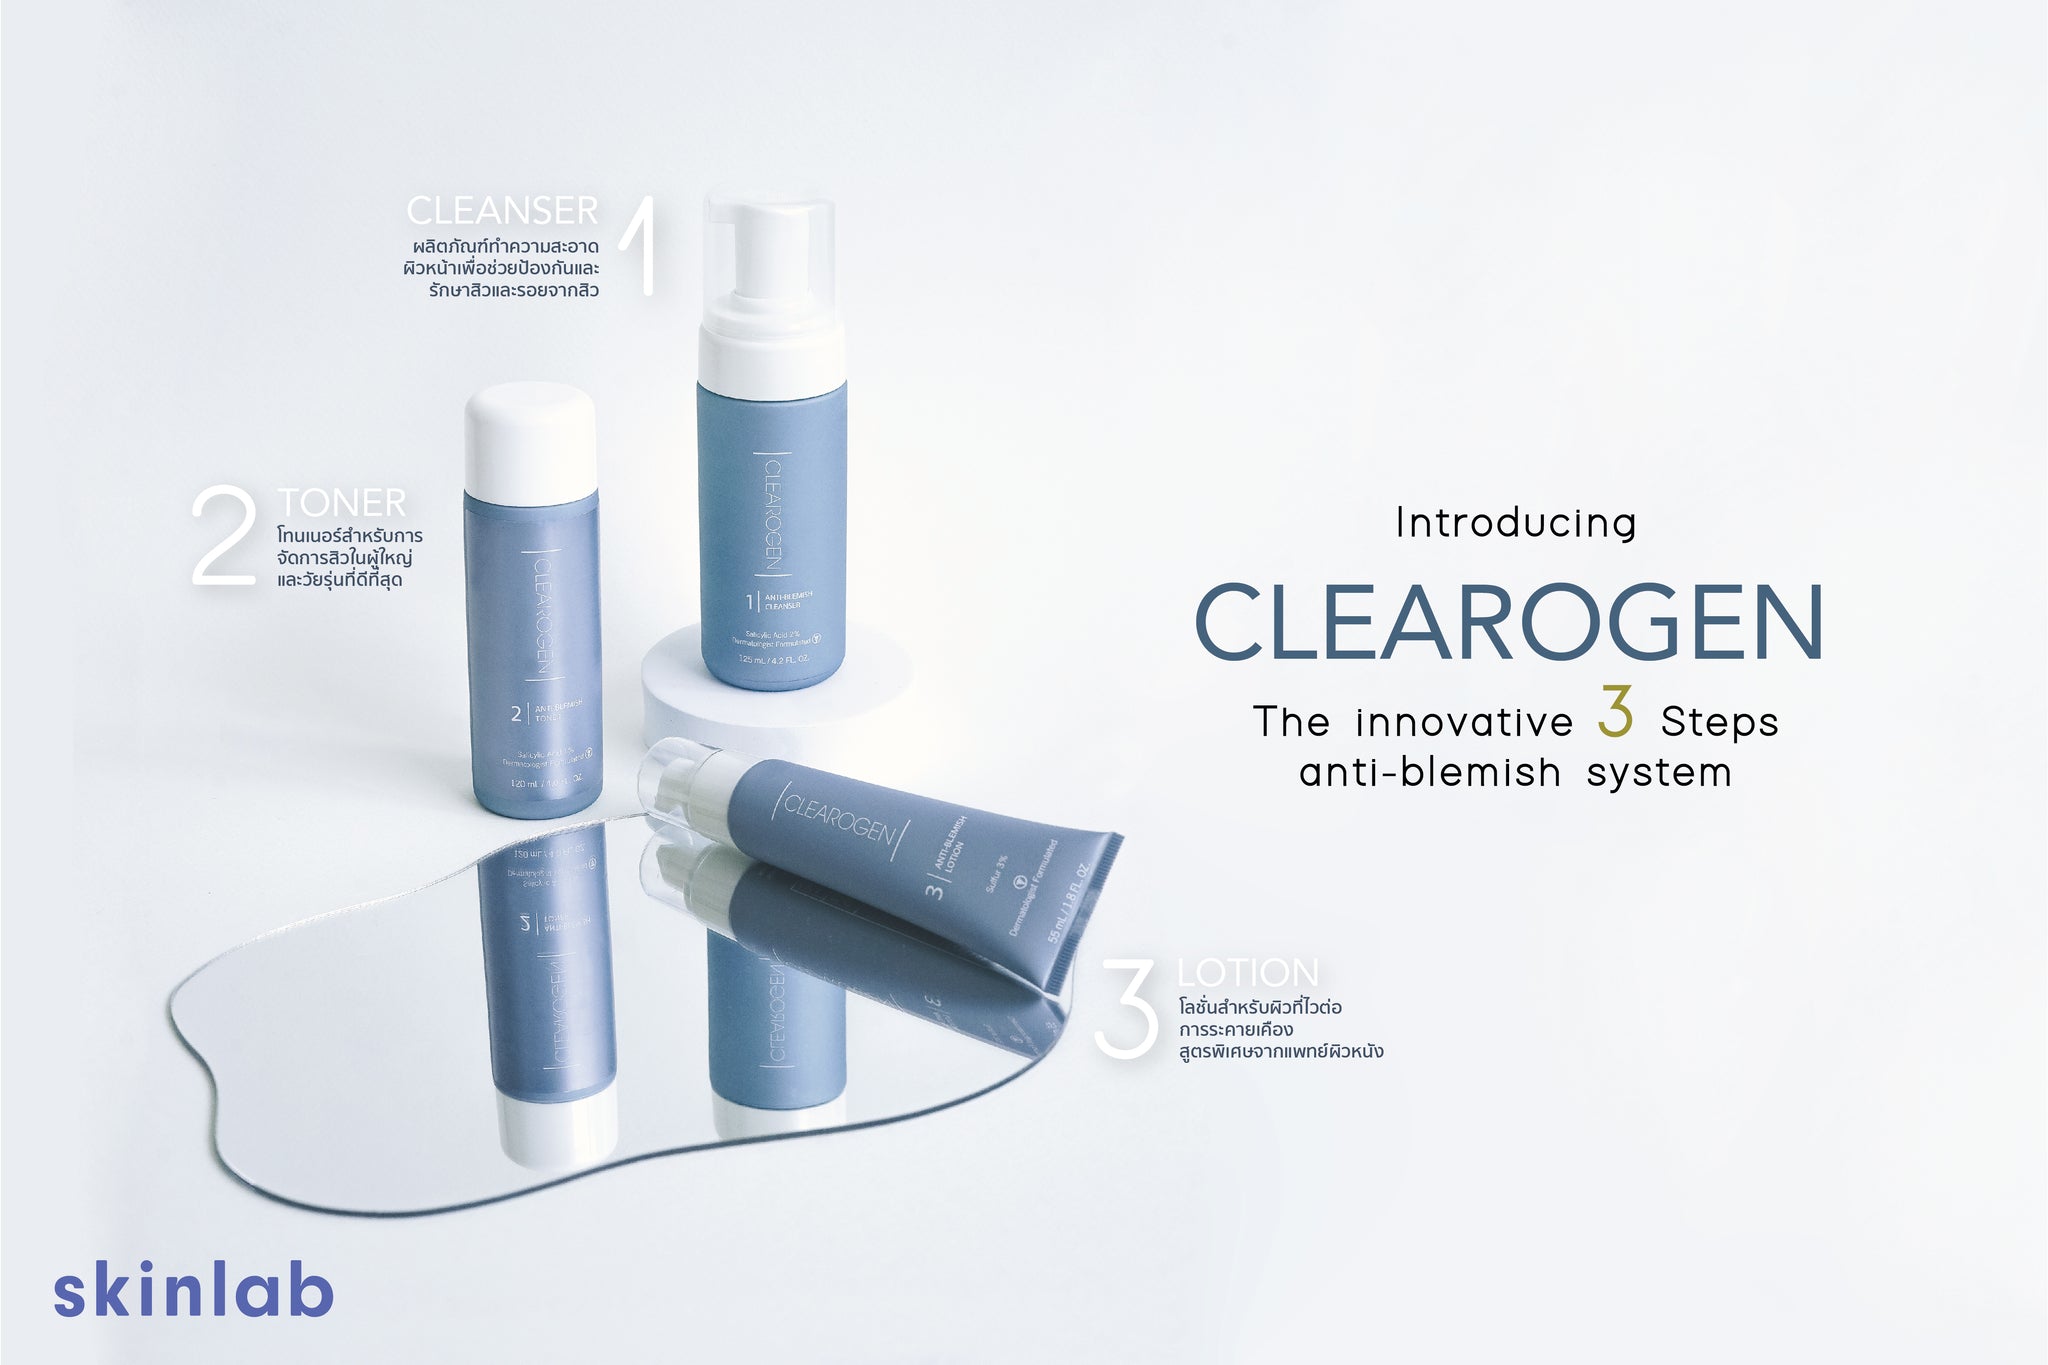 https://skinlabthailand.com/collections/clearogen